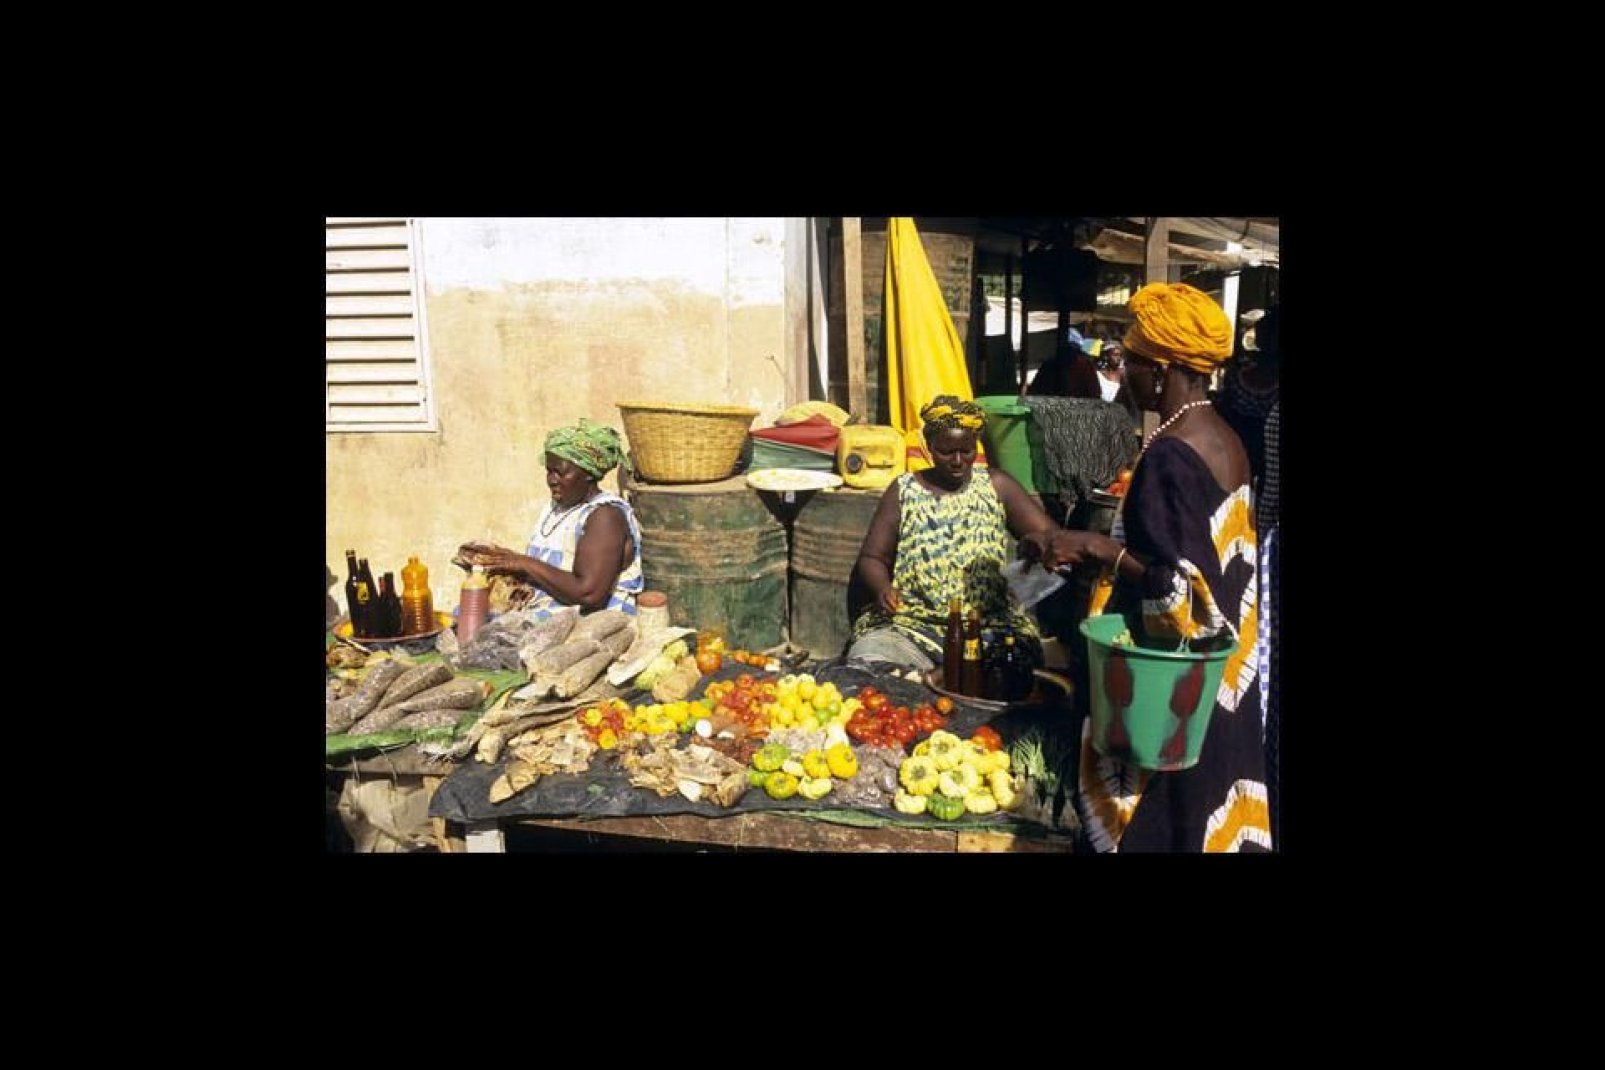 Ziguinchor market offers a wide range of fruits and vegetables, as well as dried fruit, honey, and even palm oil.